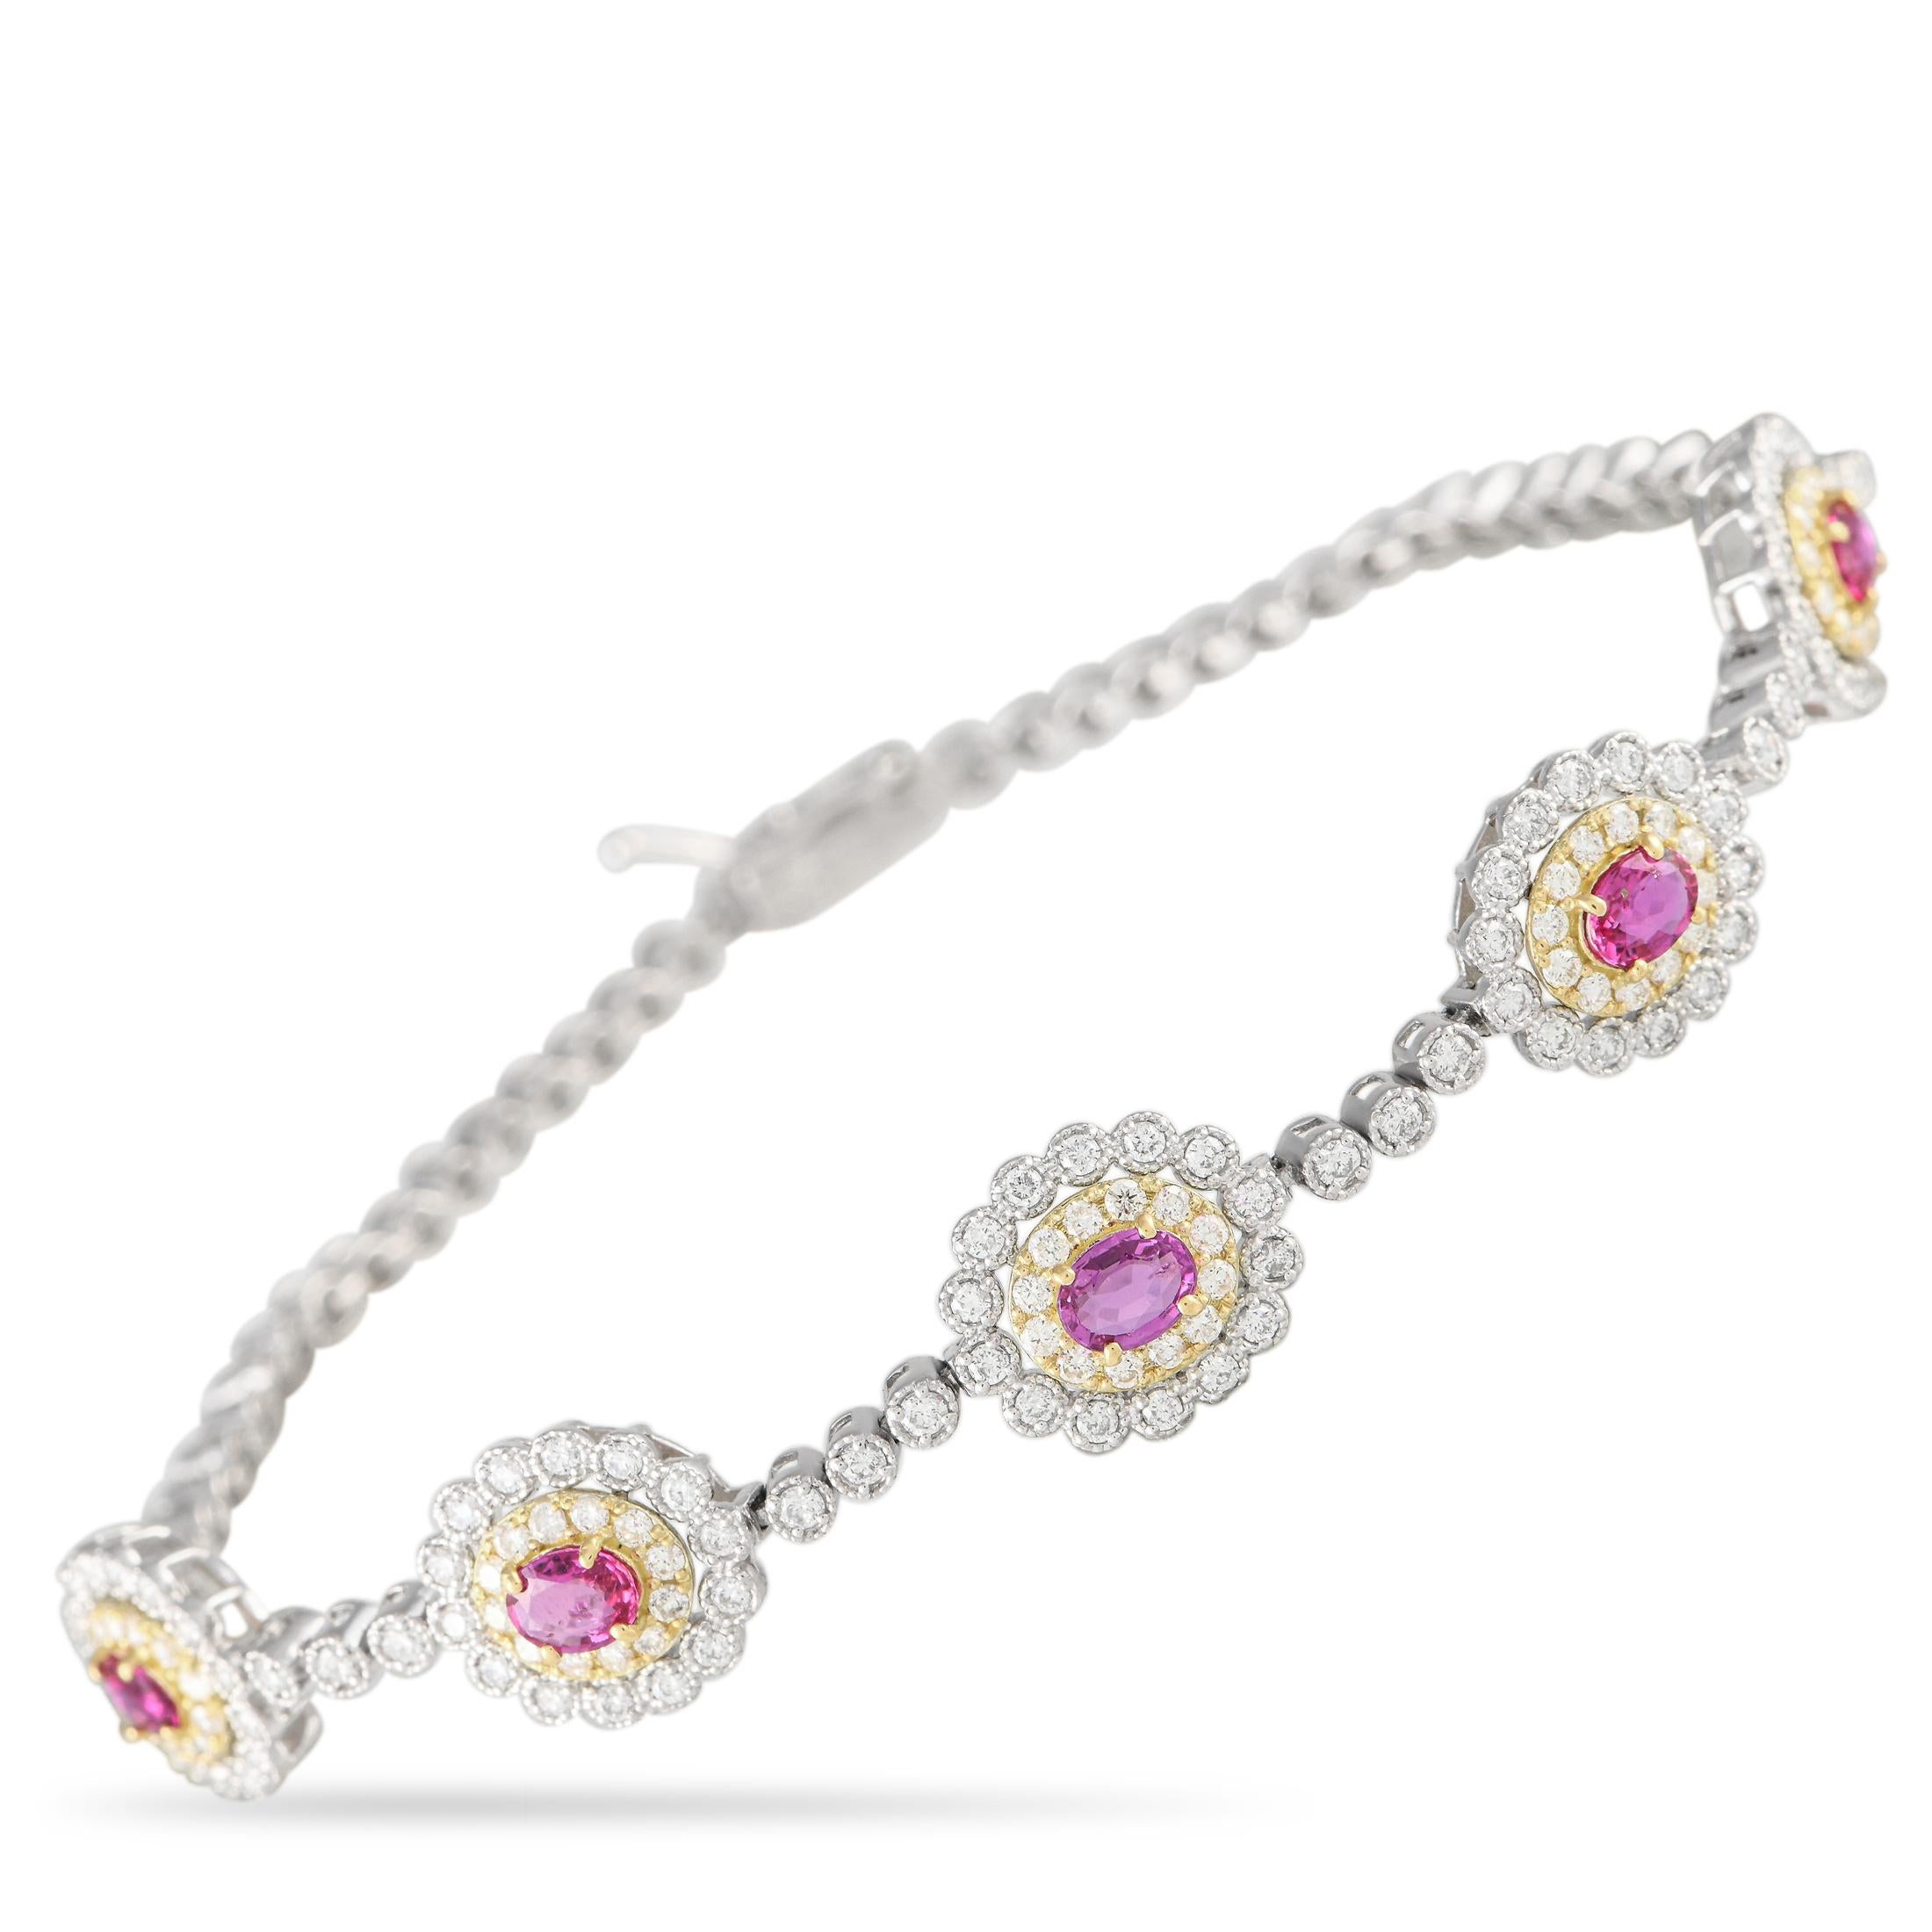 LB Exclusive 18K White Gold 1.40ct Diamond and Ruby Bracelet In New Condition For Sale In Southampton, PA